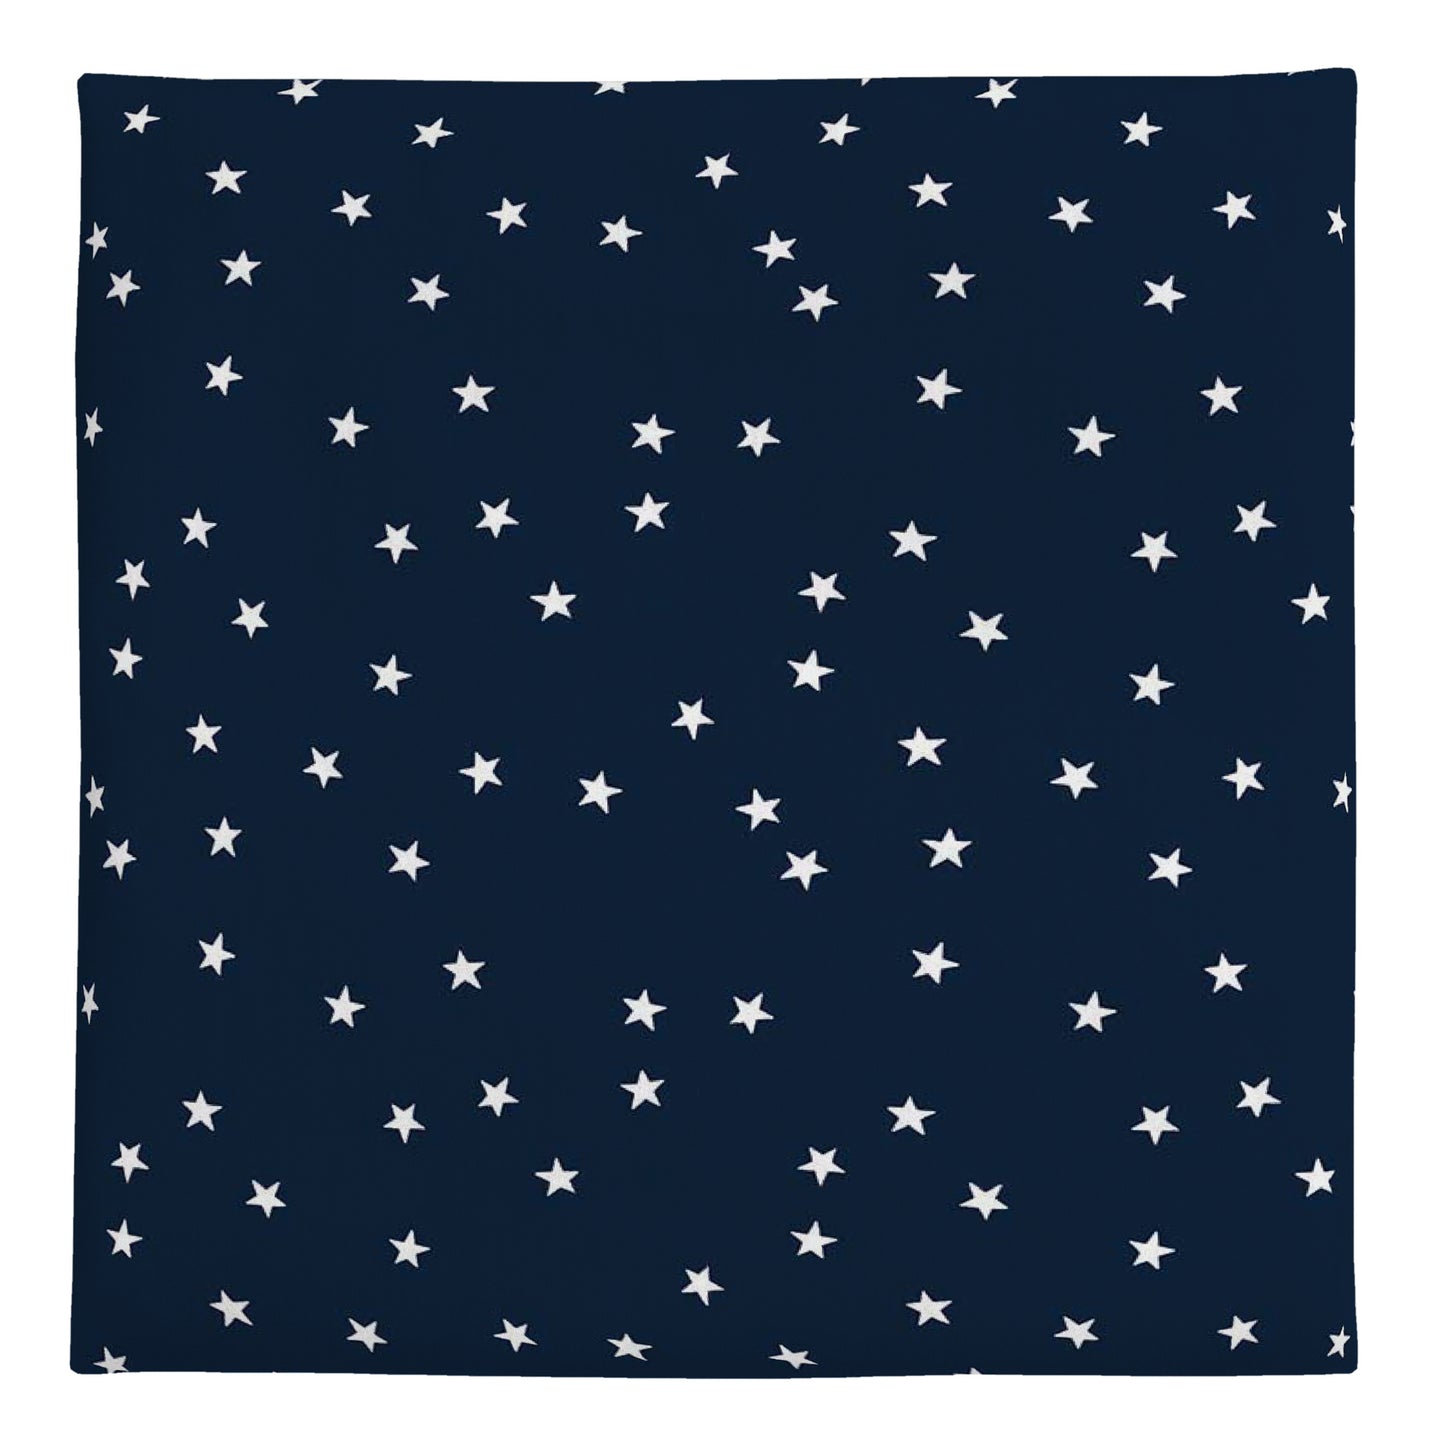 Carter's 100% Cotton Sateen Fitted Crib Sheet - Navy with White Stars